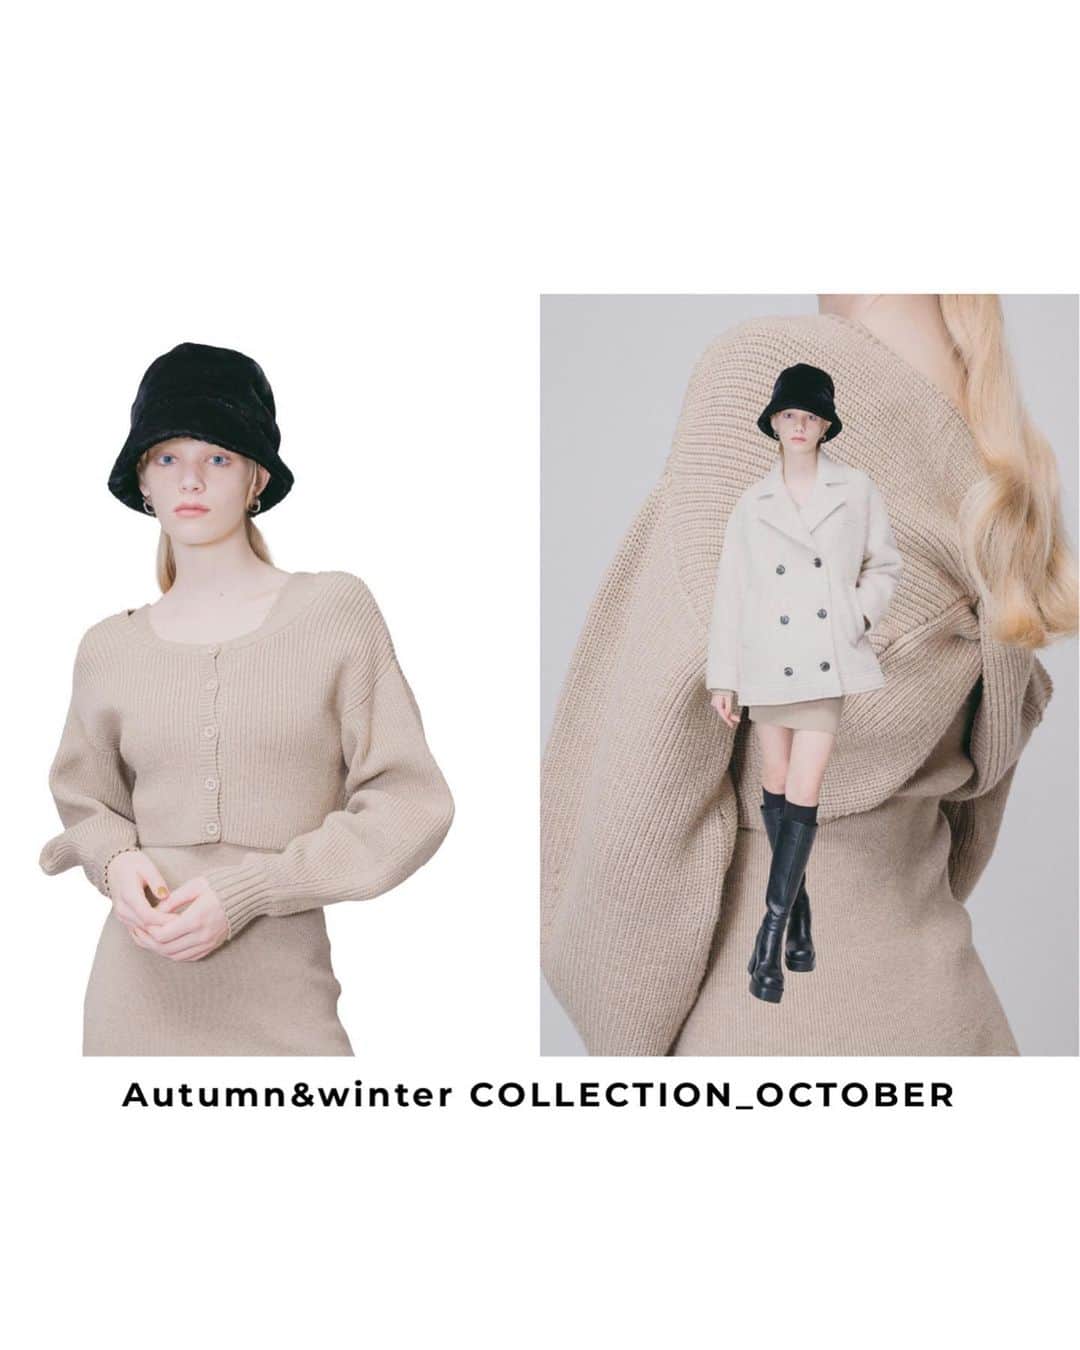 EMODAさんのインスタグラム写真 - (EMODAInstagram)「ㅤㅤㅤㅤㅤㅤㅤㅤㅤㅤㅤㅤ '23 autumn&winter October new item  ・MIDI DOUBLE COAT ￥ 17,380 tax'in ・2 PIECE W FACE KNIT ONE-PIECE ￥ 9,790 tax'in ・SIDE LOGO LONG SOX ￥ 2,970 tax'in ・ROUND SQUARE LONG BOOTS ￥ 17,380 tax'in ・FAKE FUR BUCKET HAT ￥ 6,490 tax'in ・MARK POINT PIERCE ￥ 3,960 tax'in ＿＿＿＿＿＿＿＿＿＿＿＿＿＿＿＿＿＿＿＿＿＿＿＿ ≪OUTER FAIR≫  ■OUTER ALL POINT×20&送料無料 >10/25(wed)12:00-10/29(sun)23:59  ＿＿＿＿＿＿＿＿＿＿＿＿＿＿＿＿＿＿＿＿＿＿＿＿ 詳細は( @emoda_official )のTOPのURL,storiesチェック✔️  ㅤㅤㅤ  ㅤㅤㅤ ㅤㅤㅤㅤㅤㅤ #EMODA #EMODA_OUTER #EMODA_SHOES #boots #outer #onepiece #ニットワンピース #ミニワンピース #2wayワンピース #ダブルコート #ミドルコート #ミディコート #オーバーサイズコート #ロングブーツ #フェイクファーハット #アウターコーデ #秋コーデ #冬コーデ #RUNWAYchannel #2023AW #autumn #winter @emoda_snap」10月27日 19時58分 - emoda_official